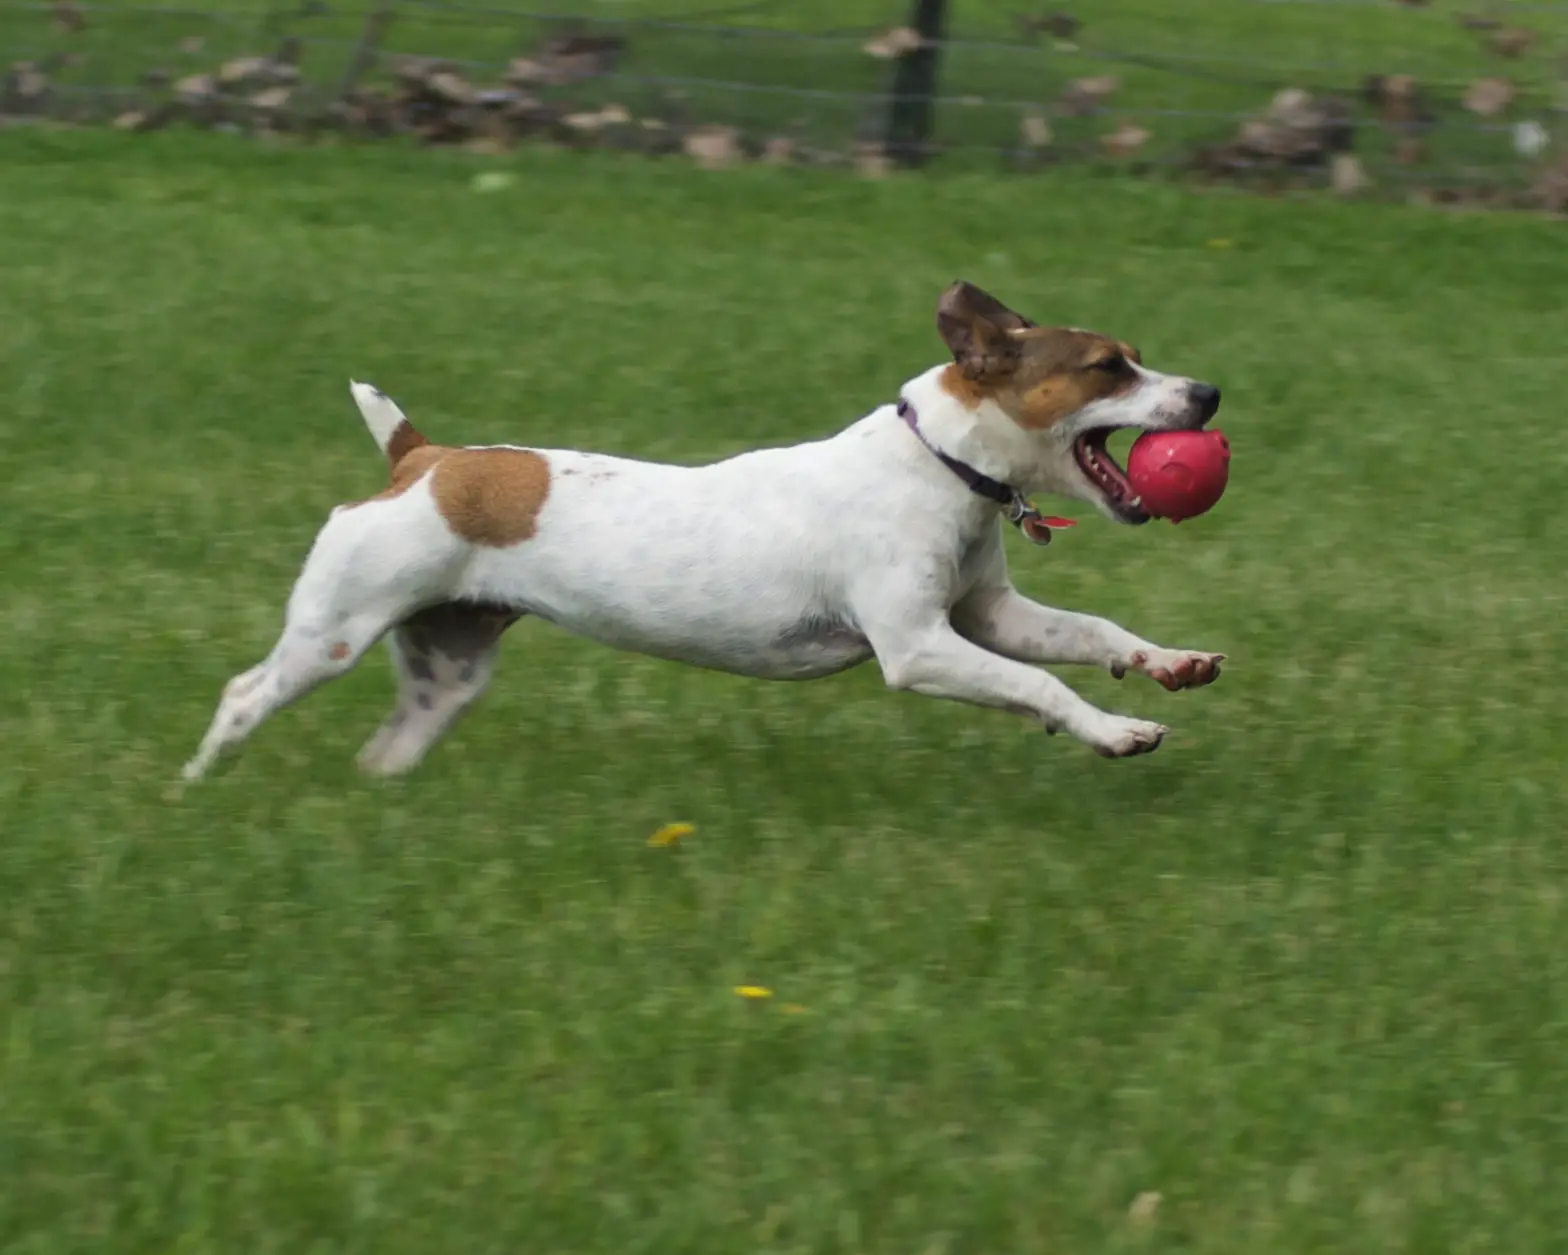 a Jack Russell Terrier running with a red ball in its mouth